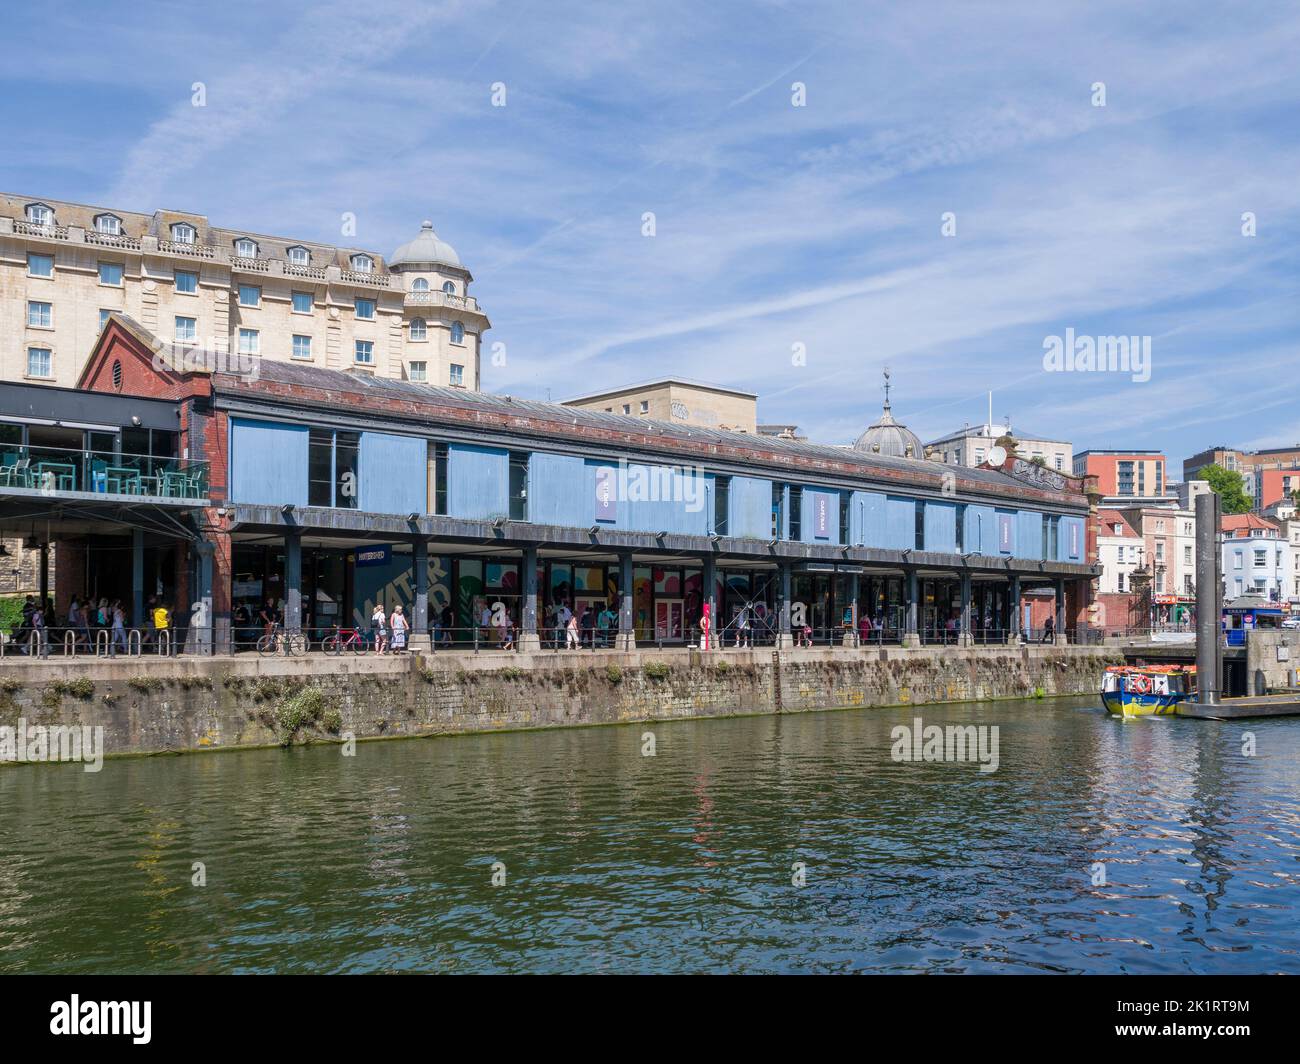 The Watershed cinema, café, bar and conference centre, formerly harbourside warehouses, alongside St Augustine’s Reach in the Bristol Floating Harbour, England, UK. Cinema Stock Photo